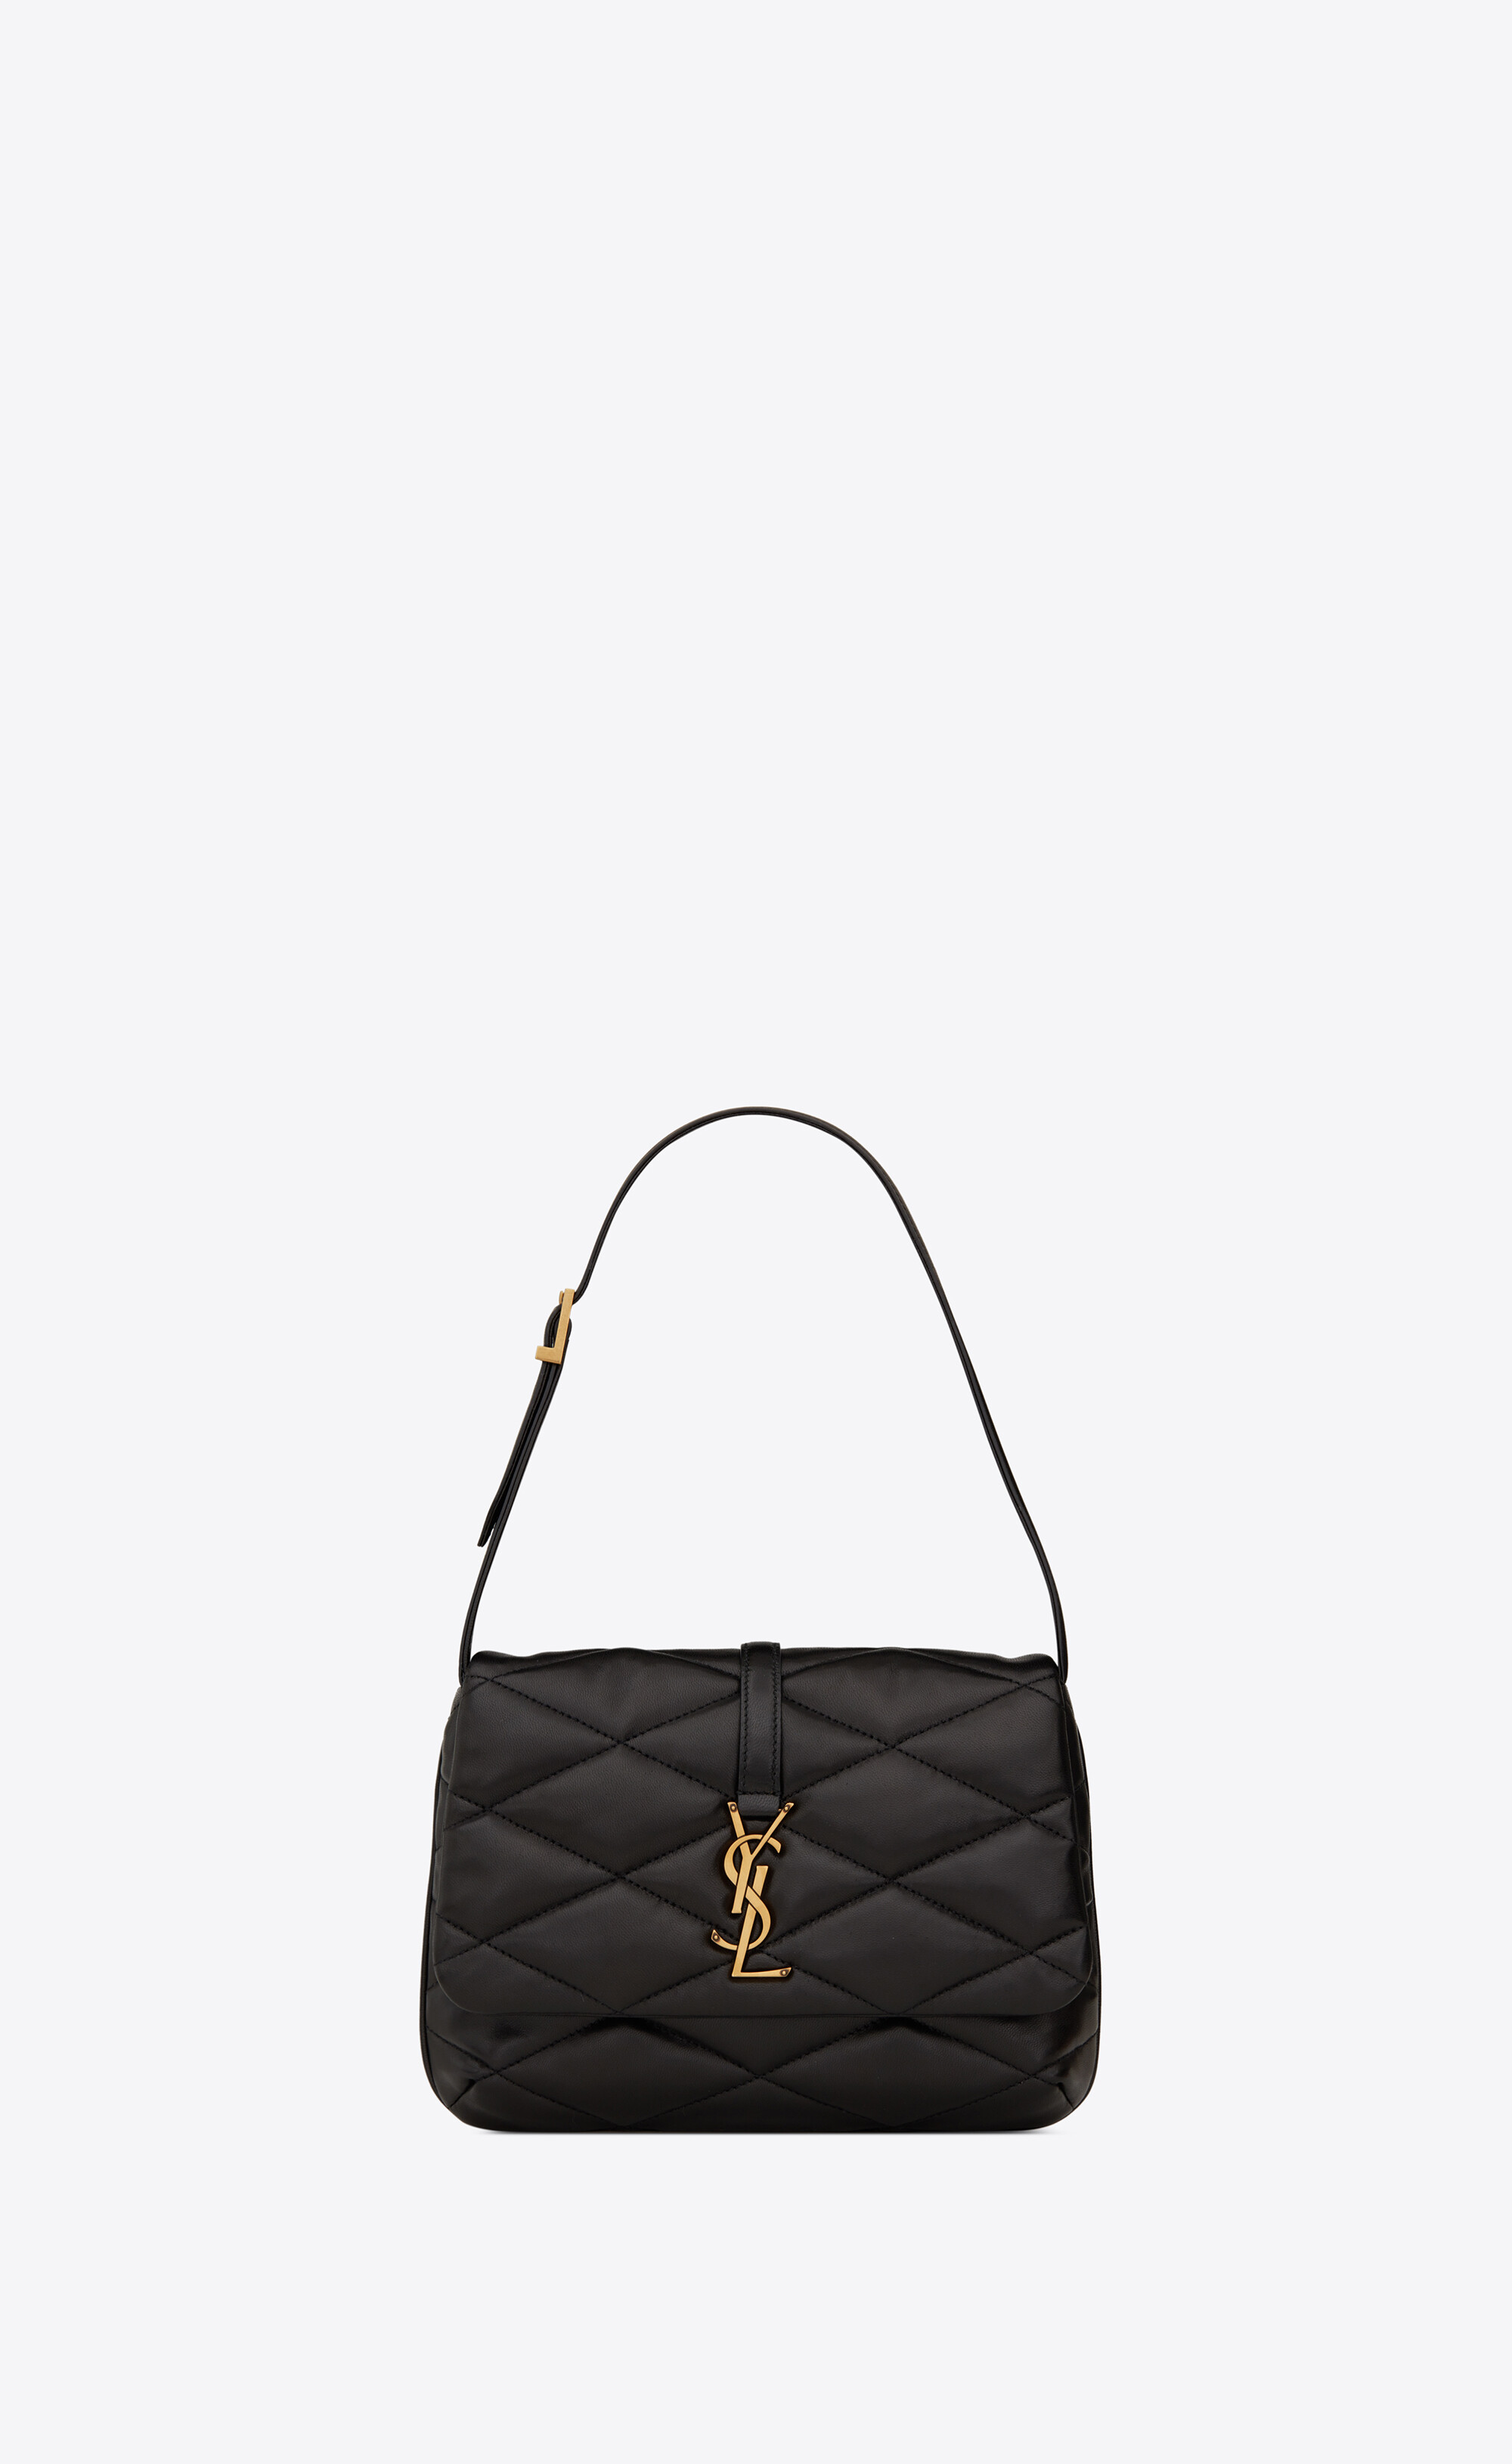 YSL Lambskin Quilted Le 57 Hobo Bag replica - Affordable Luxury Bags